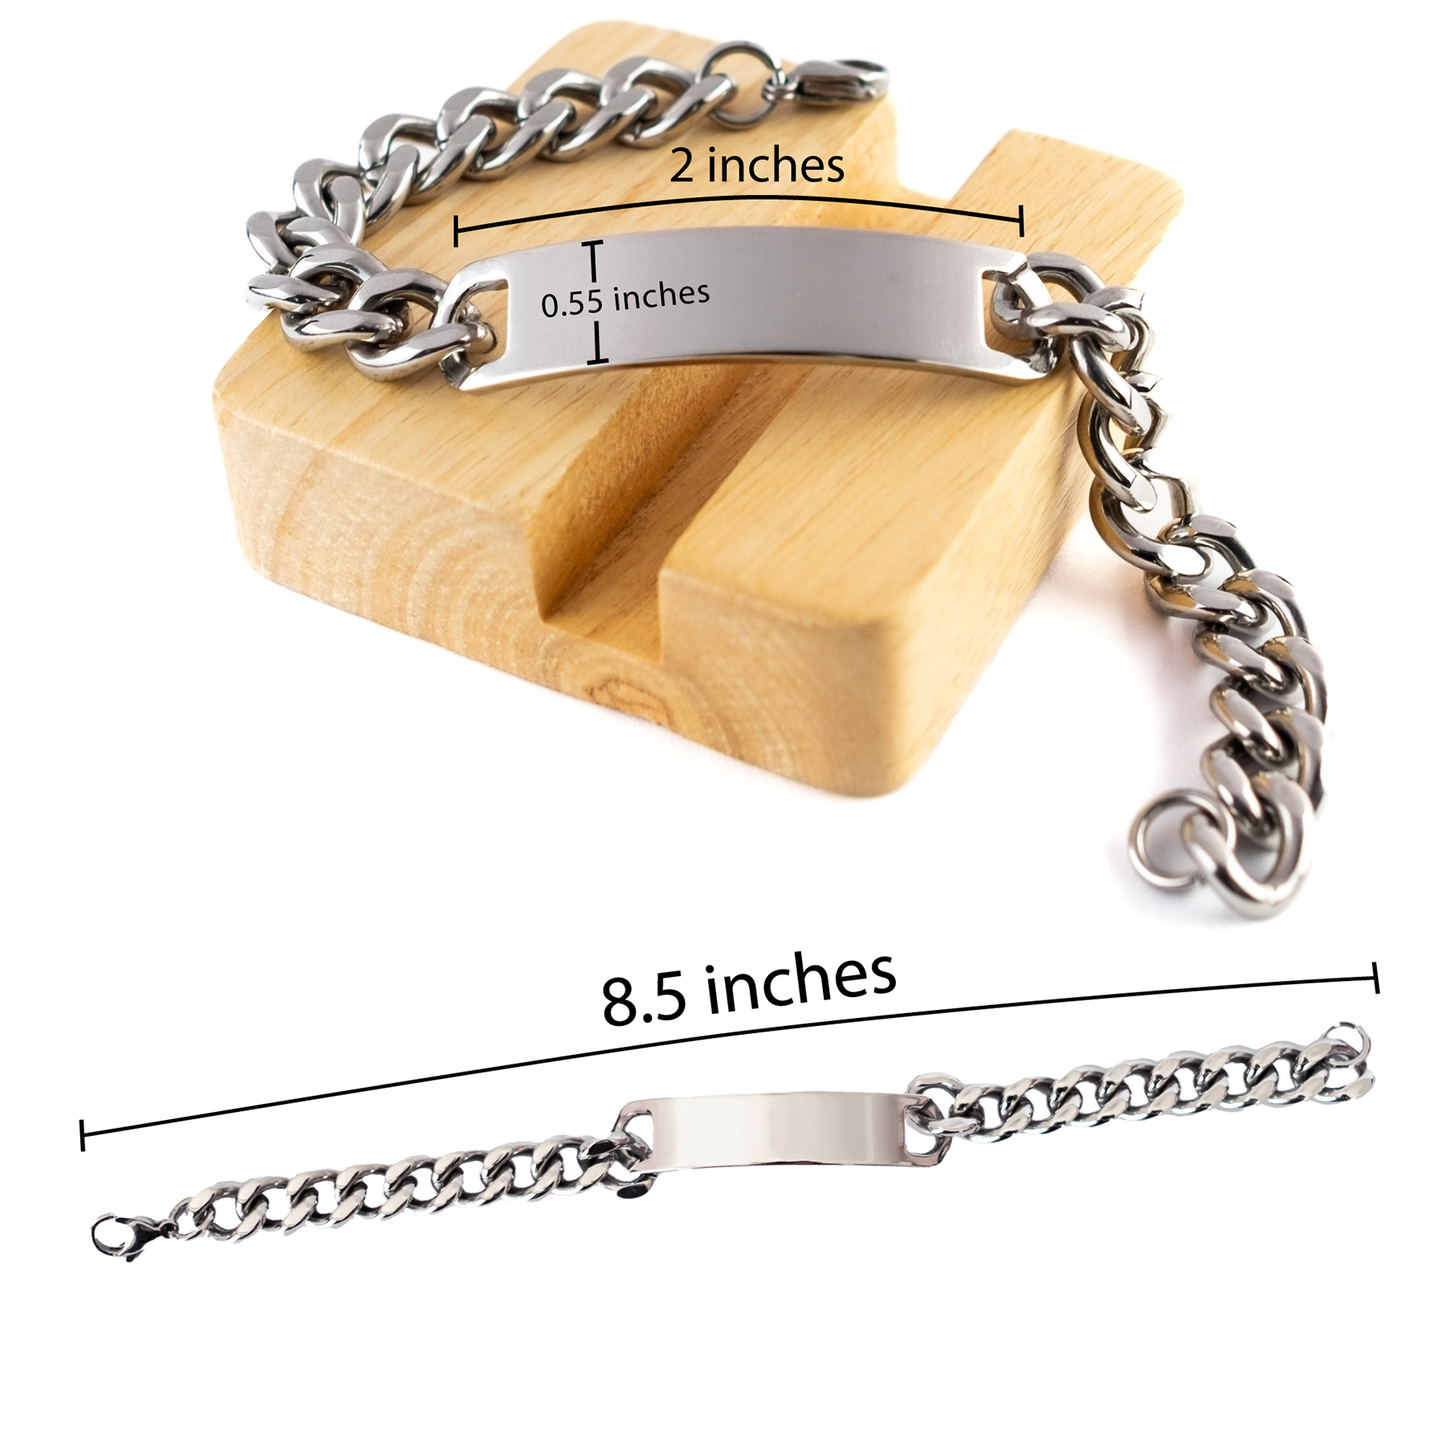 Godson Cuban Chain Stainless Steel Bracelet, Never forget that I love you forever, Inspirational Godson Birthday Unique Gifts From Godmother